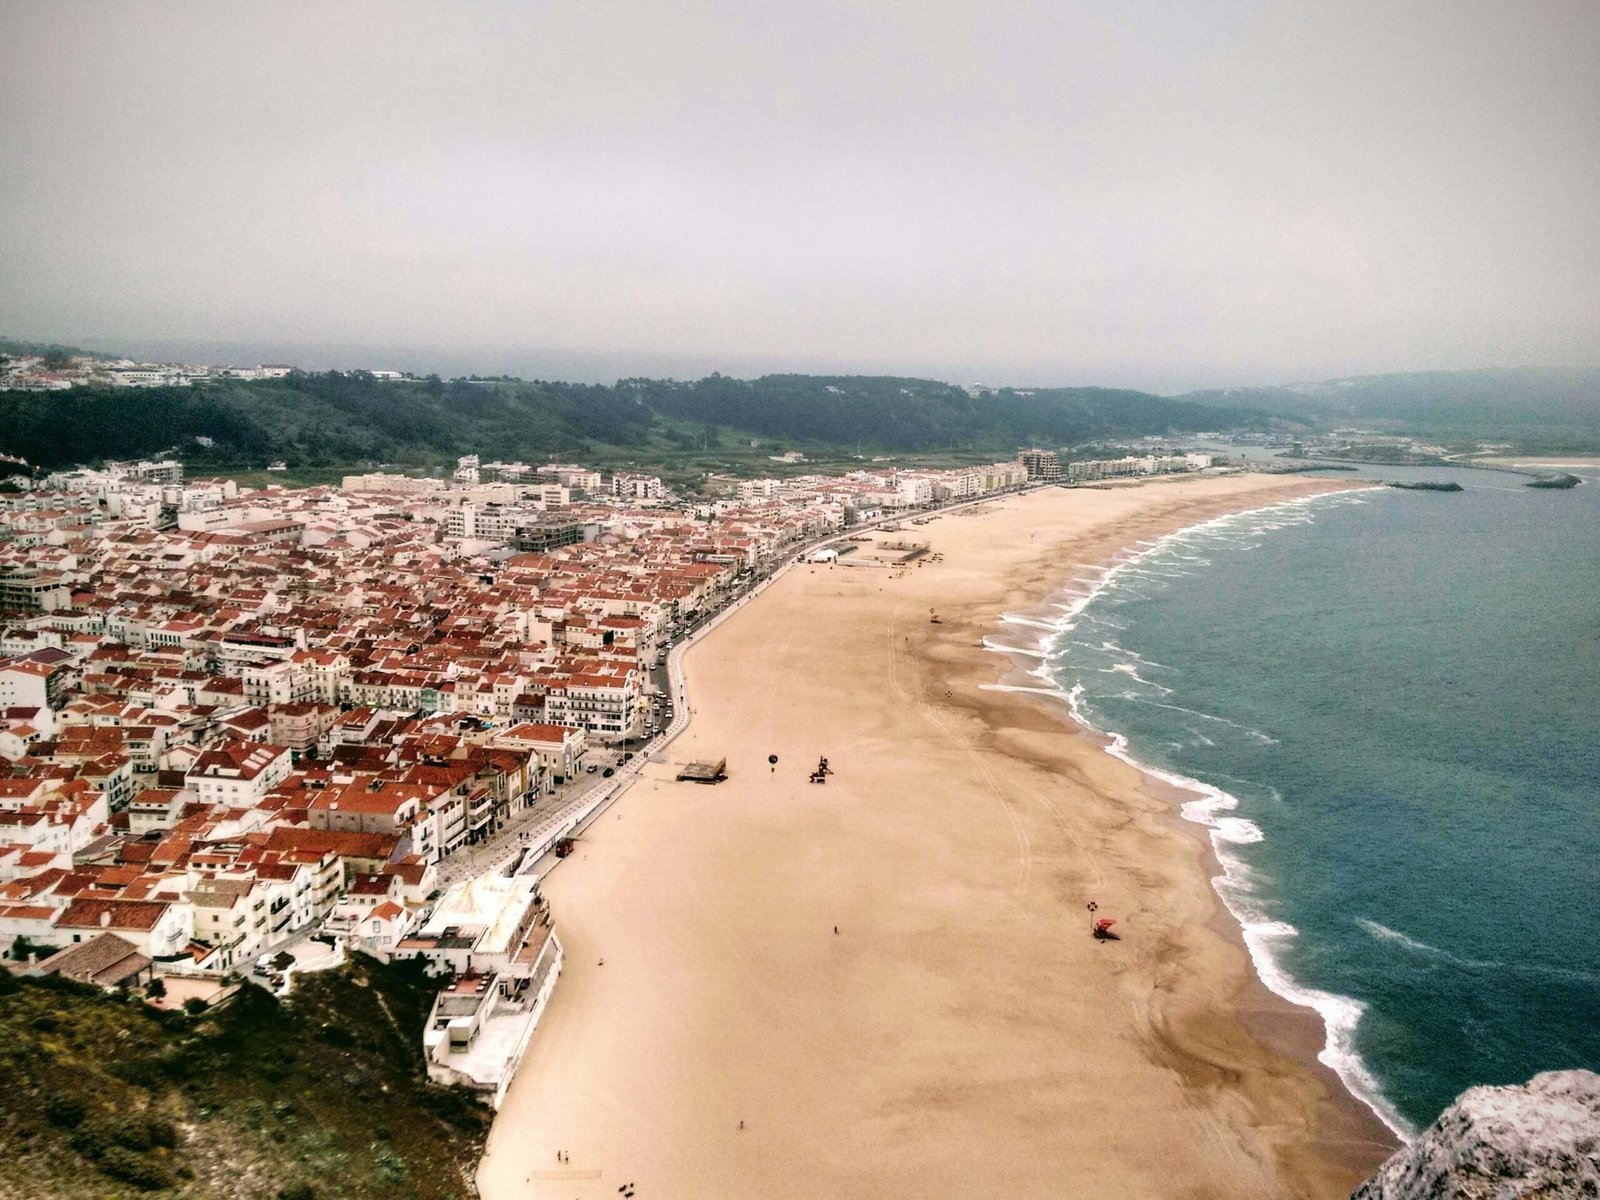 A view of the famous surfing beach at Nazare Portugal.